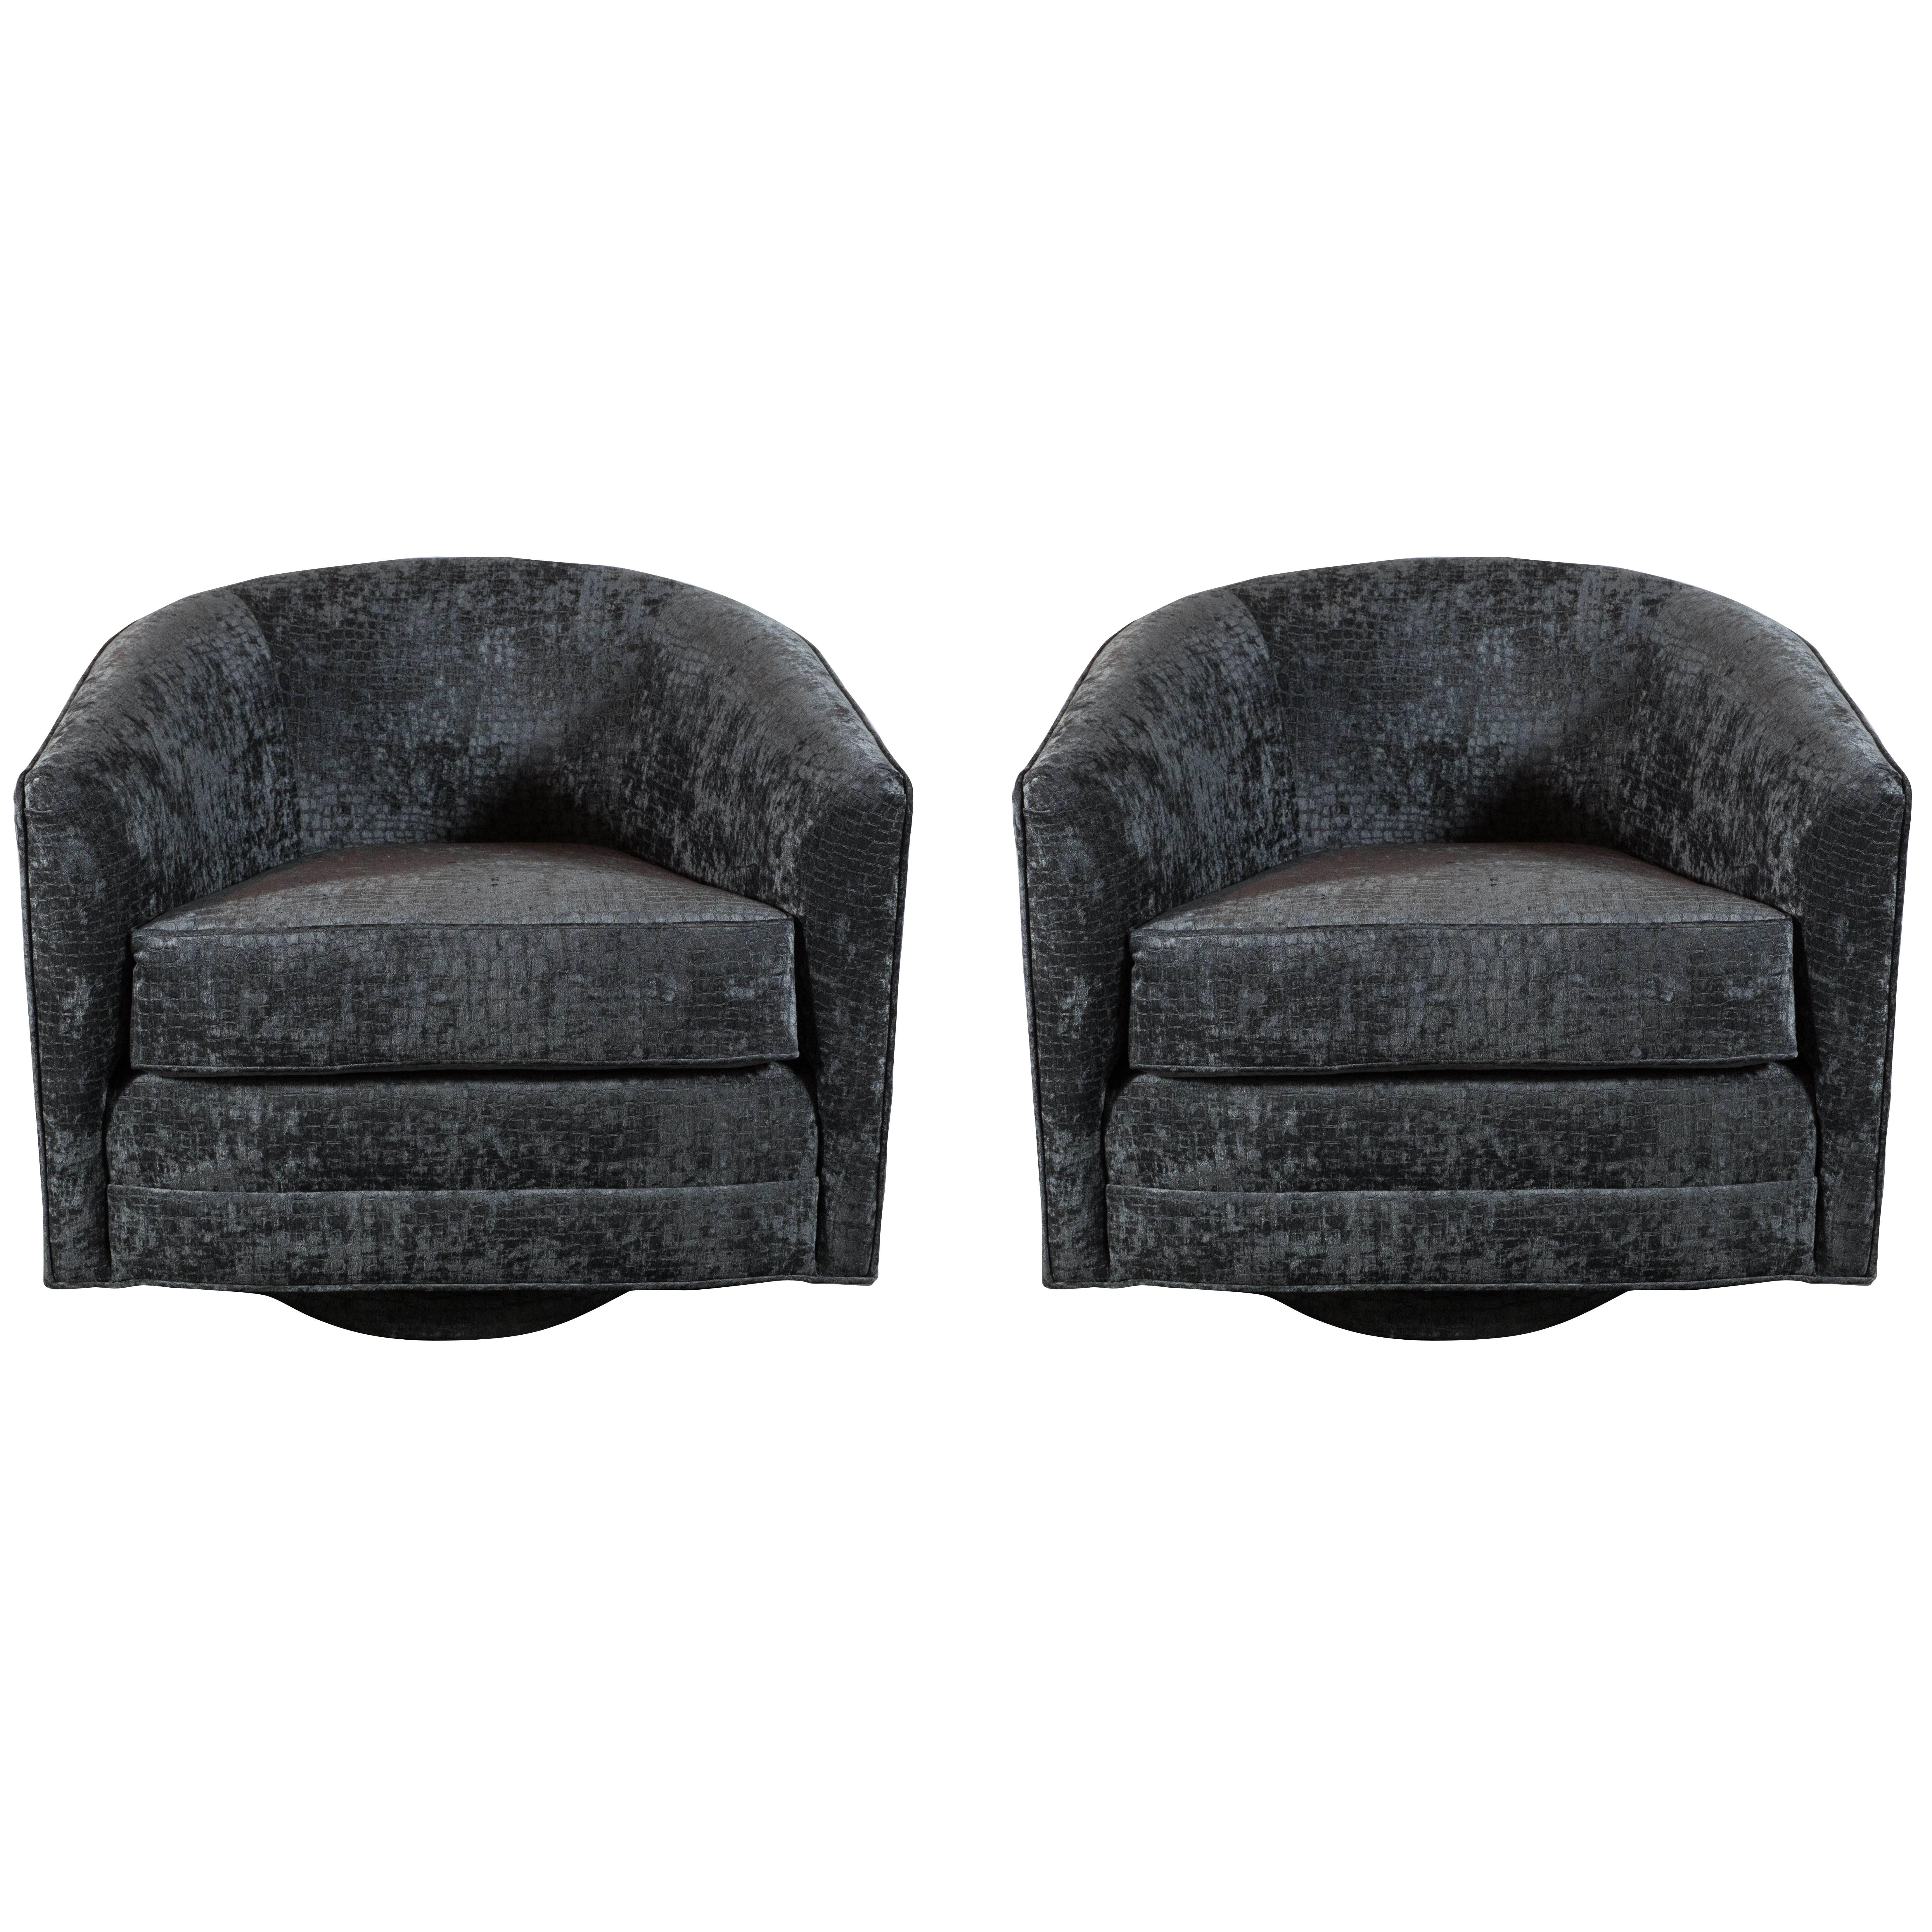 Luxe Pair of Milo Baughman Curved-Back Swivel Chairs in Gauffrage Croc Velvet